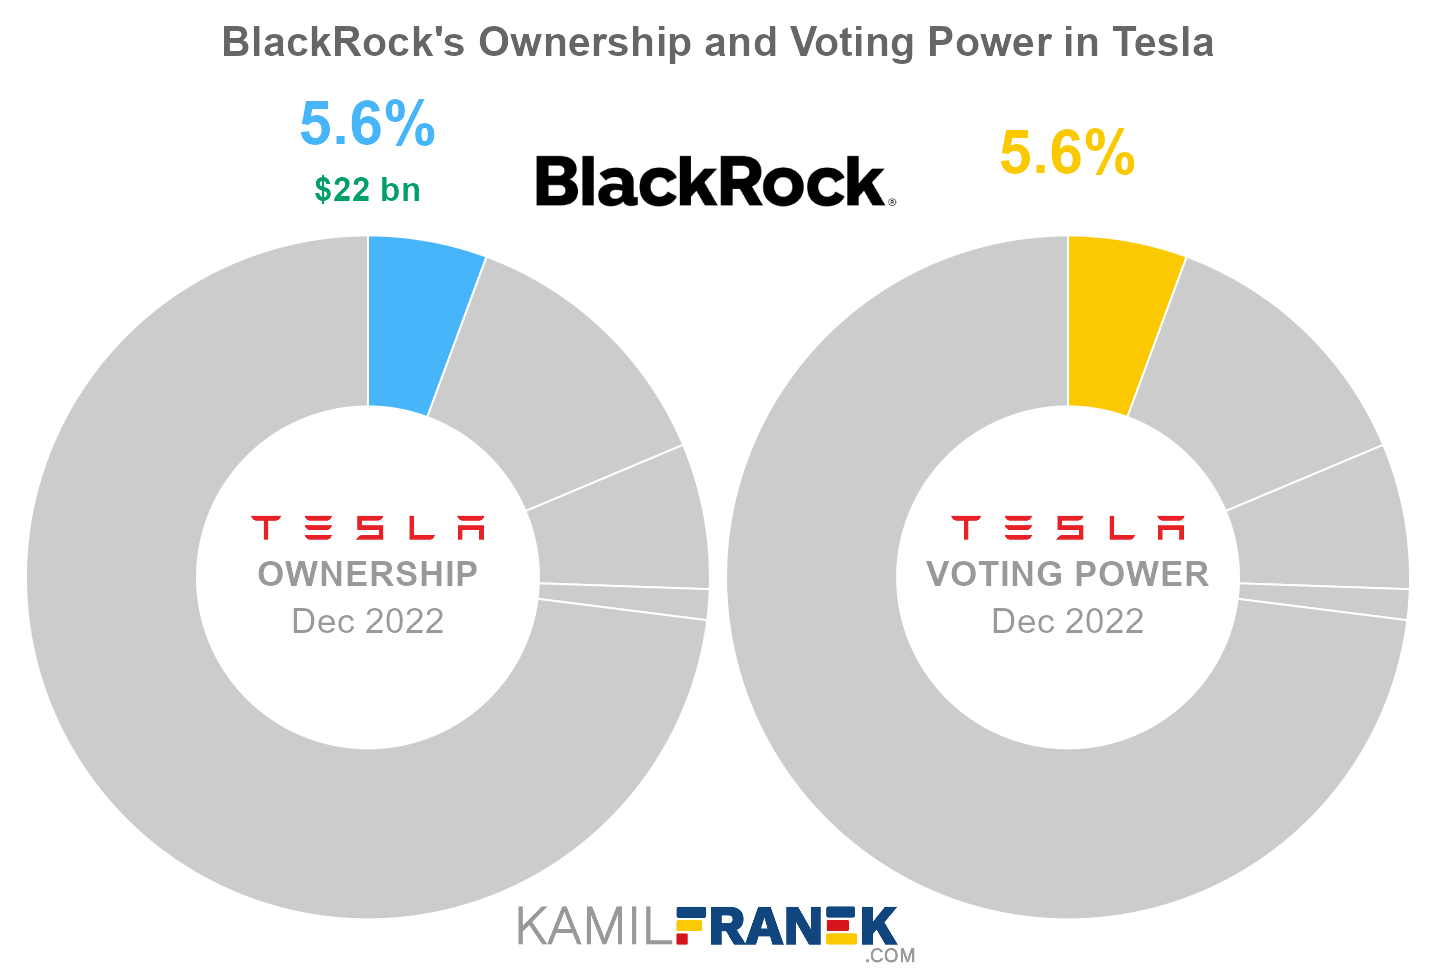 BlackRock's share ownership and voting power in Tesla (chart)